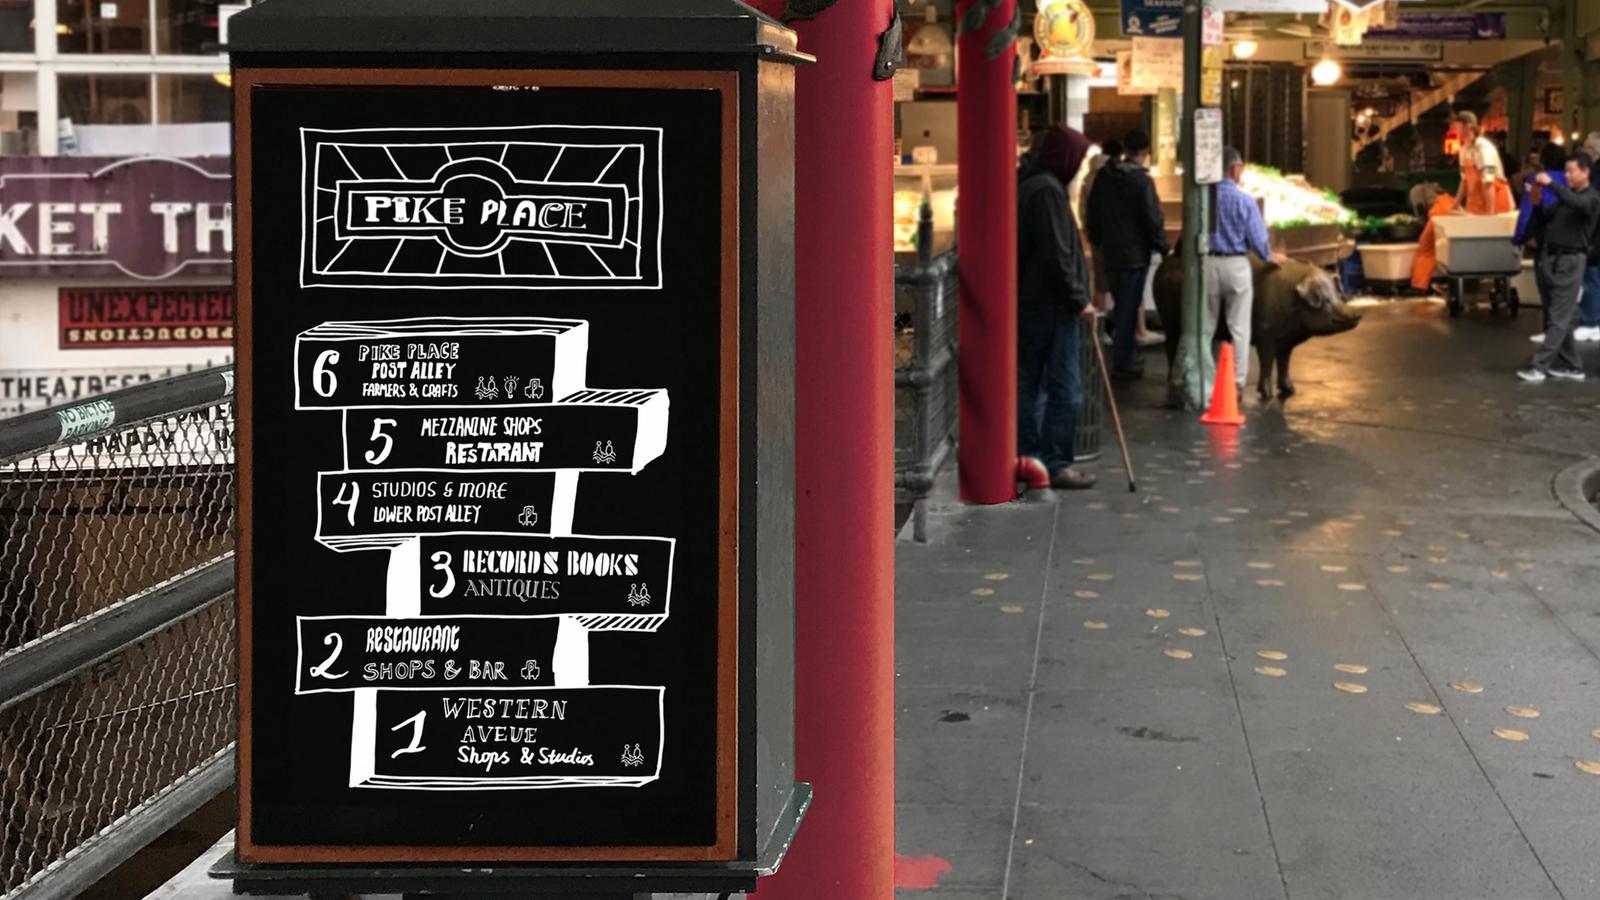 Pike Place Market // wayfinding system